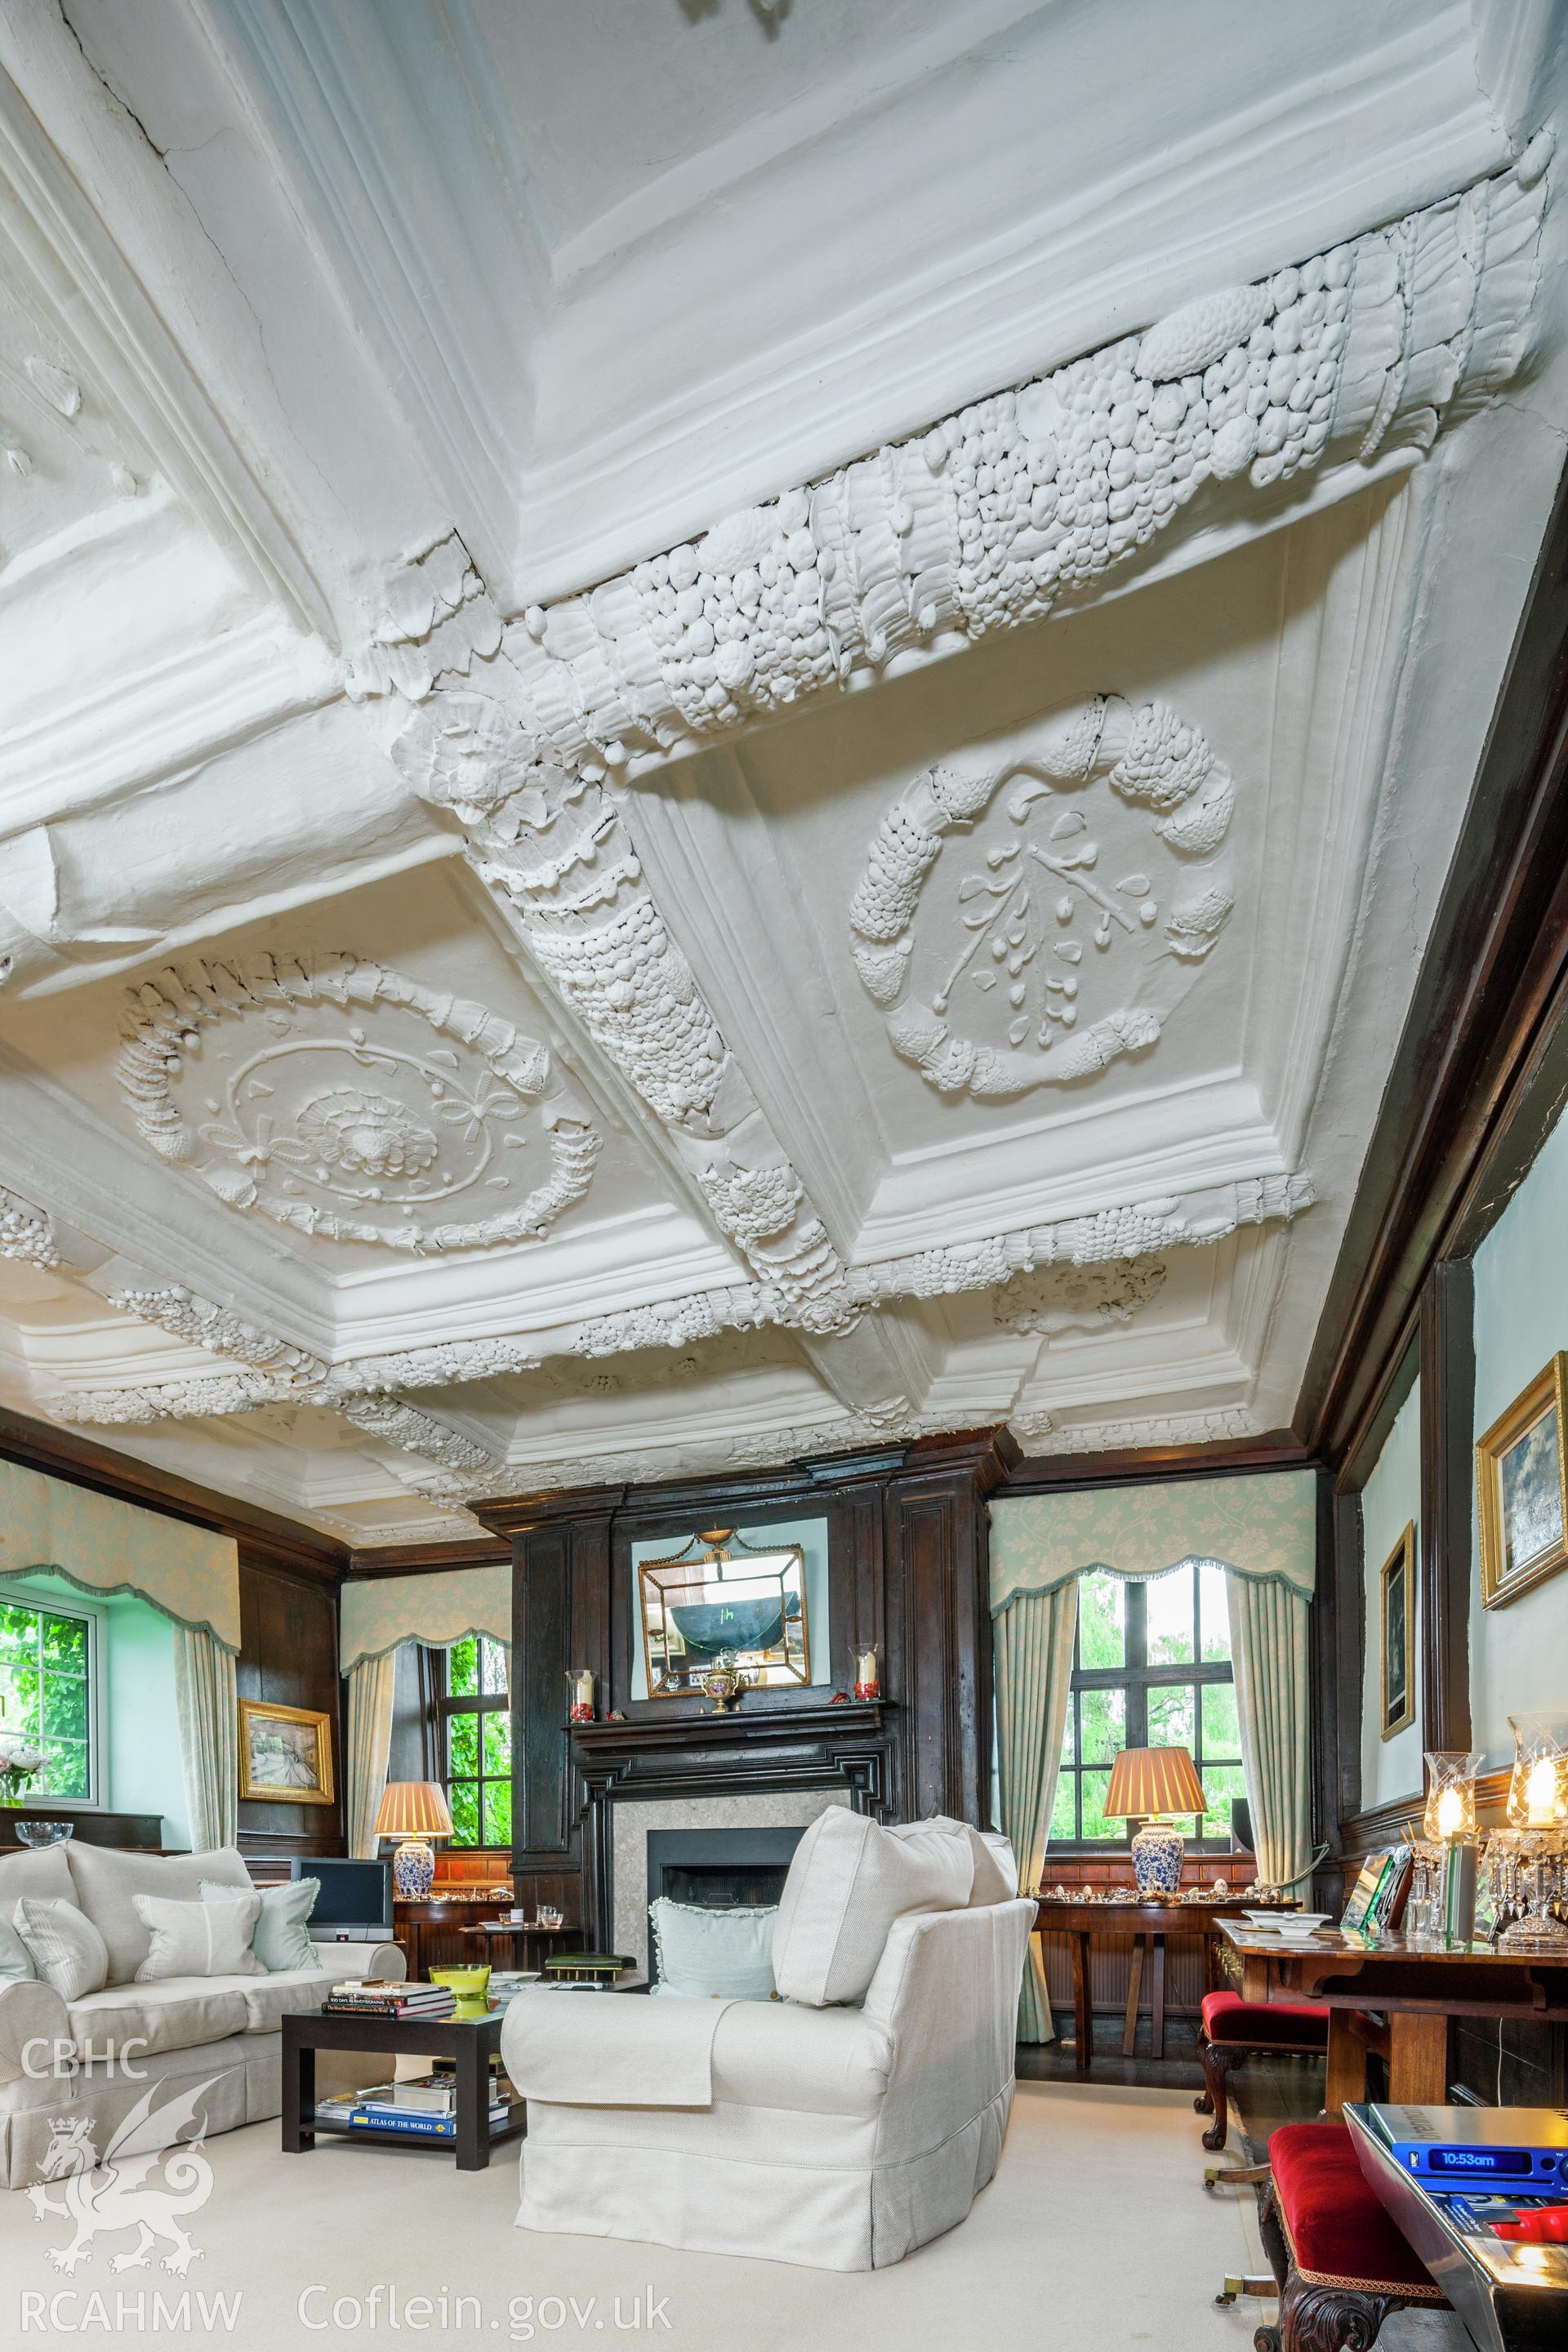 Interior of parlour with decorated plaster ceiling.